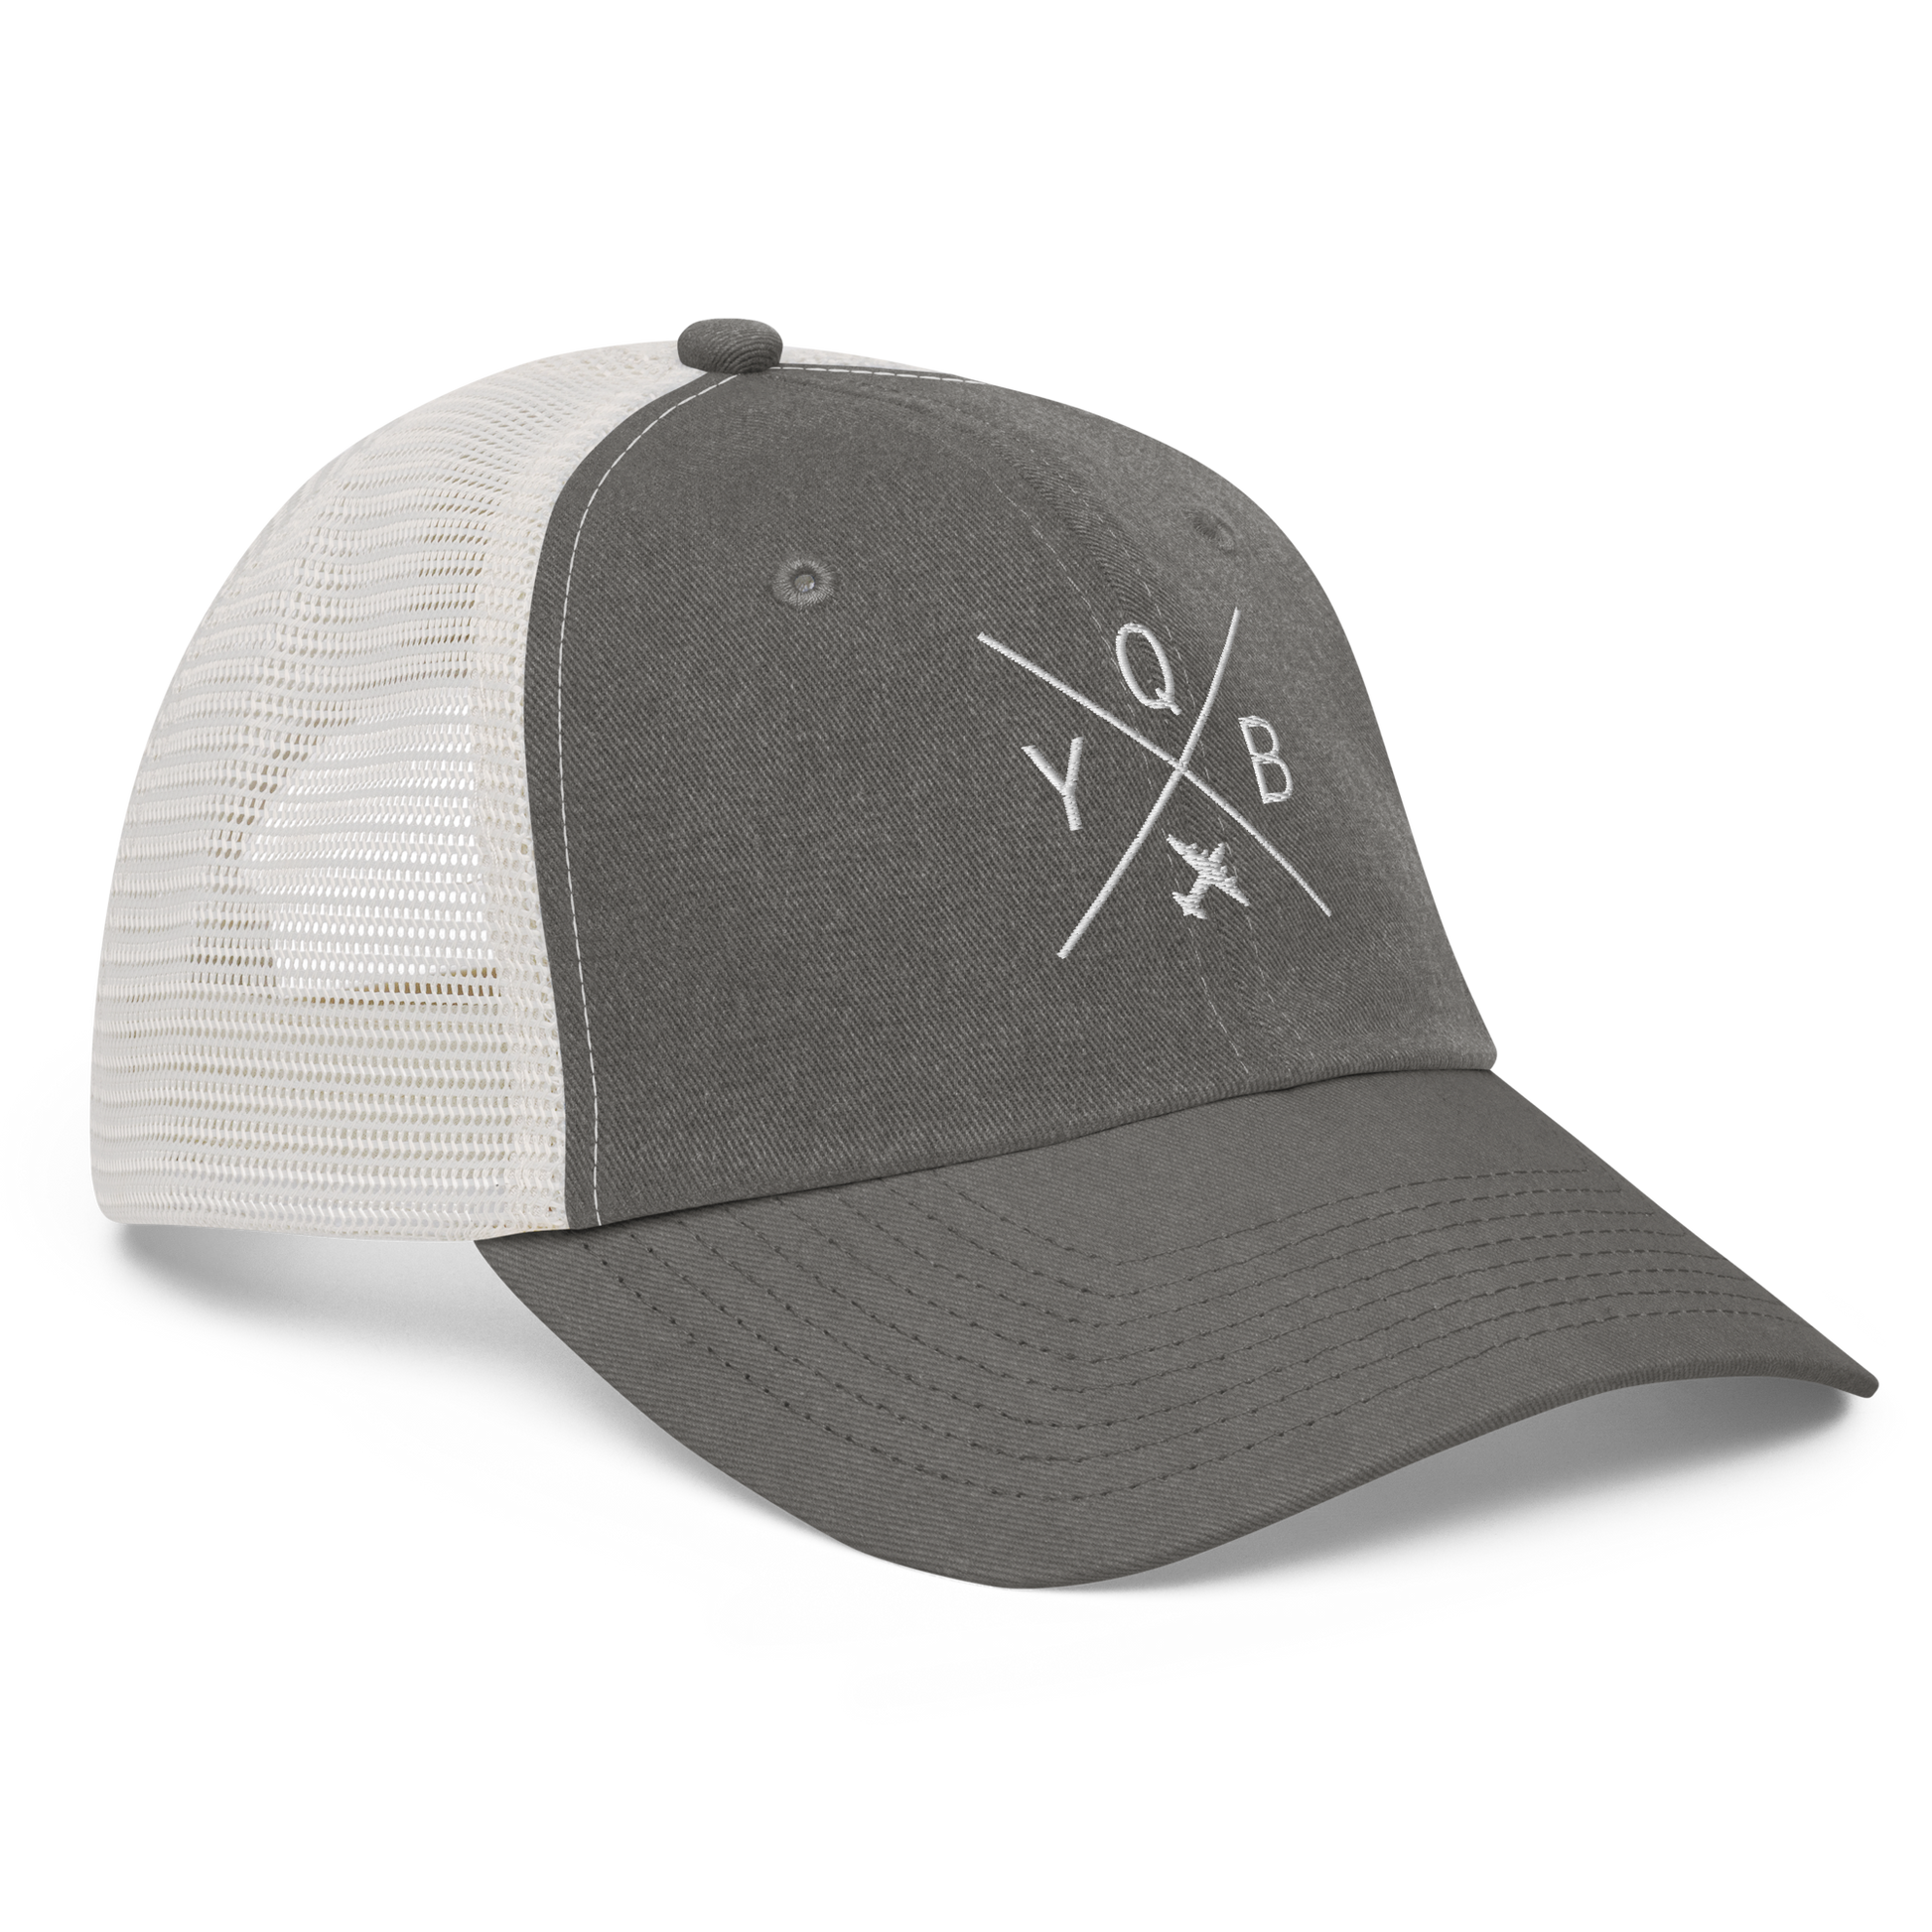 Crossed-X Pigment-Dyed Trucker Cap • YQB Quebec City • YHM Designs - Image 10